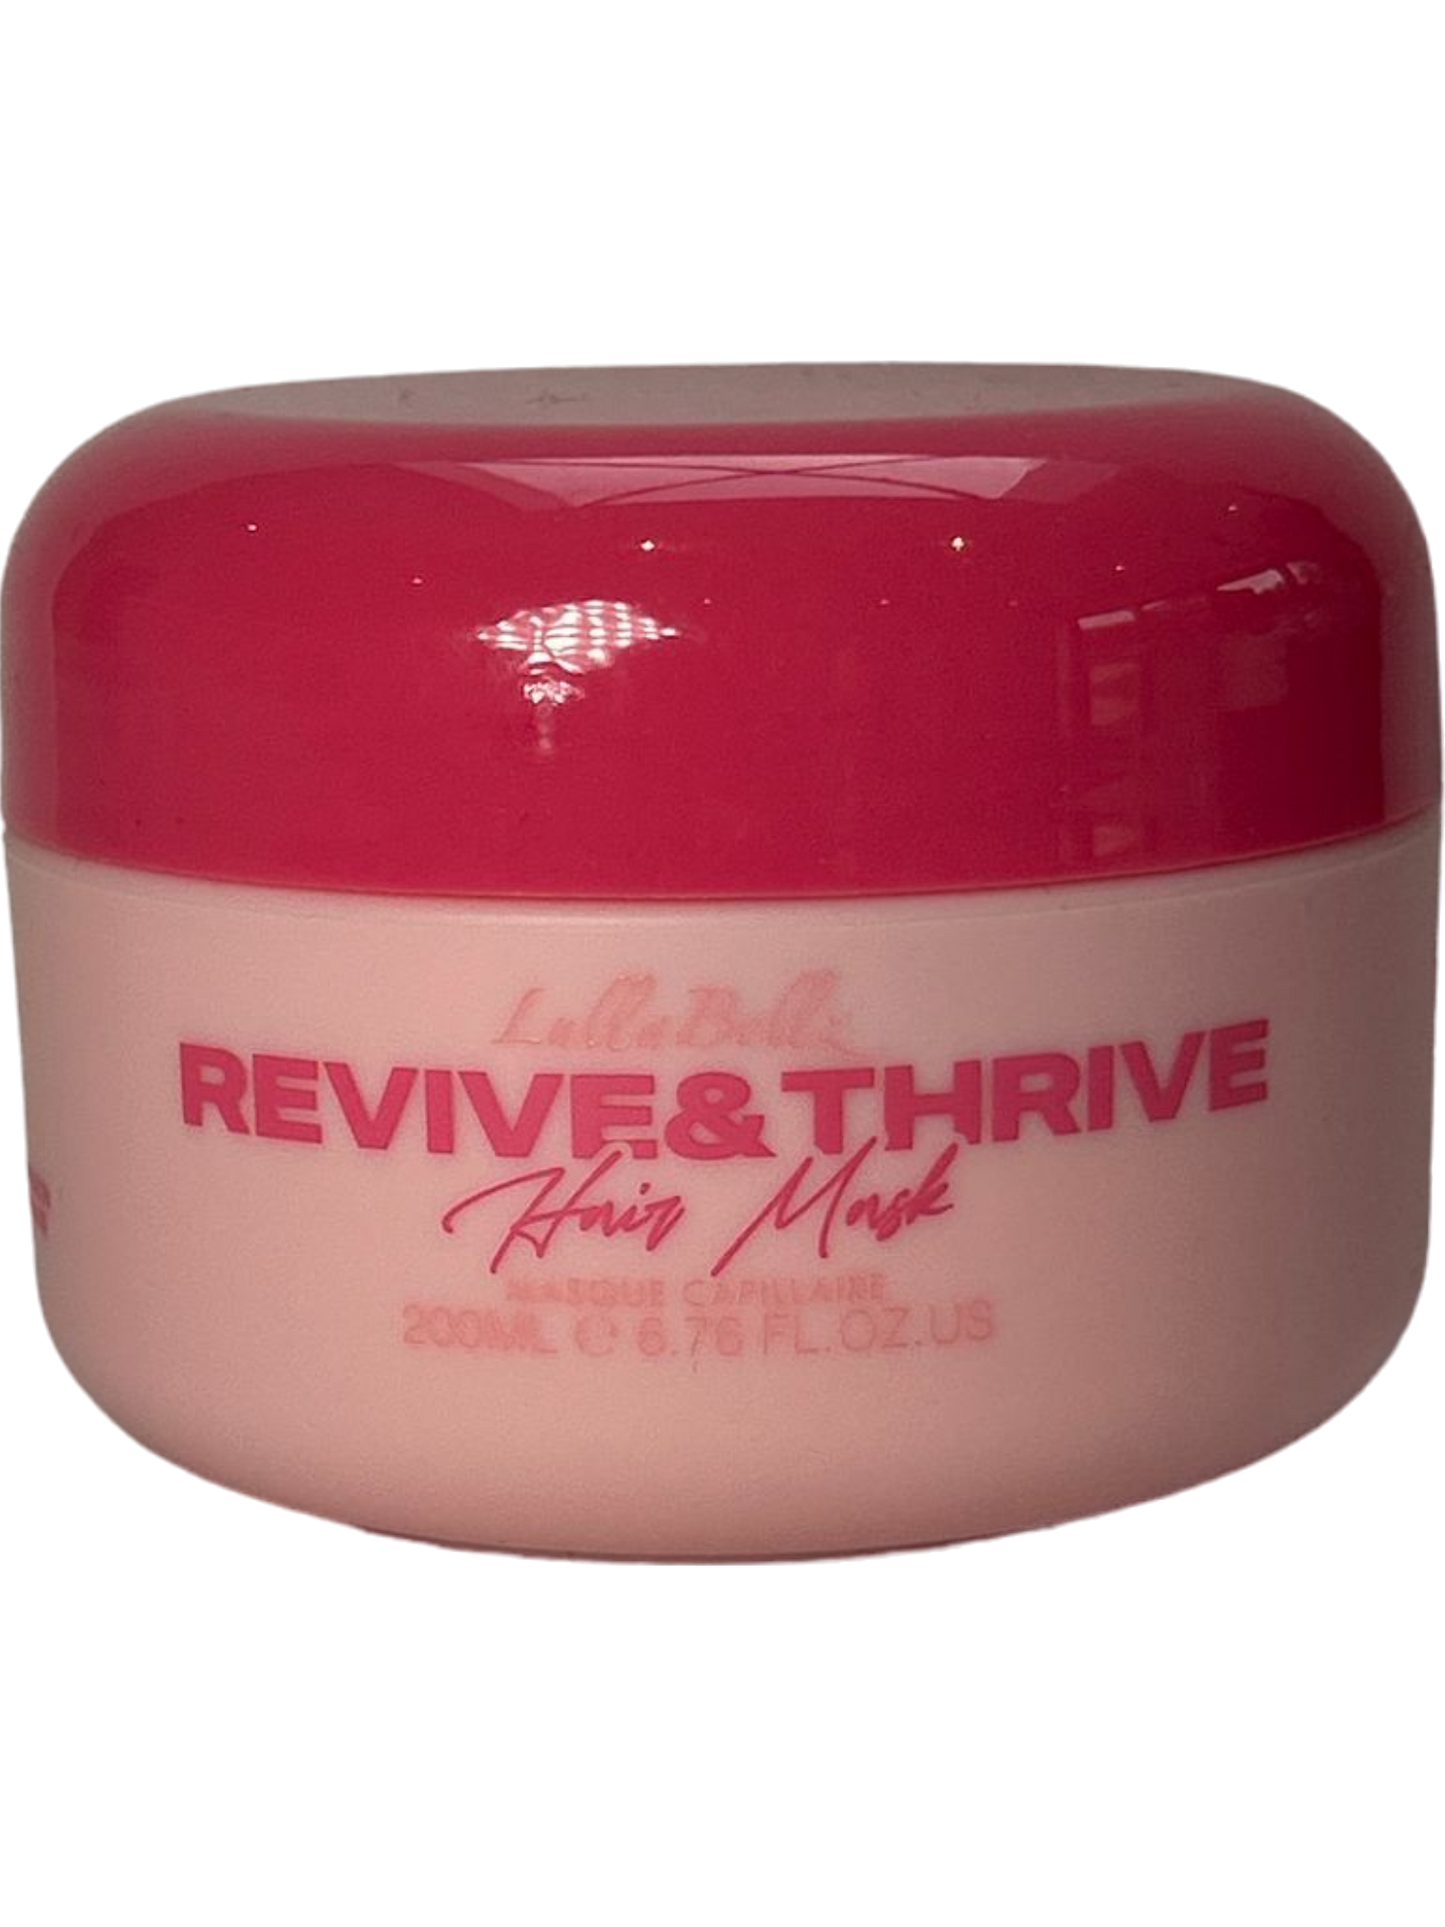 LaBelleBelle Pink Revive & Thrive Hair Mask 200ml